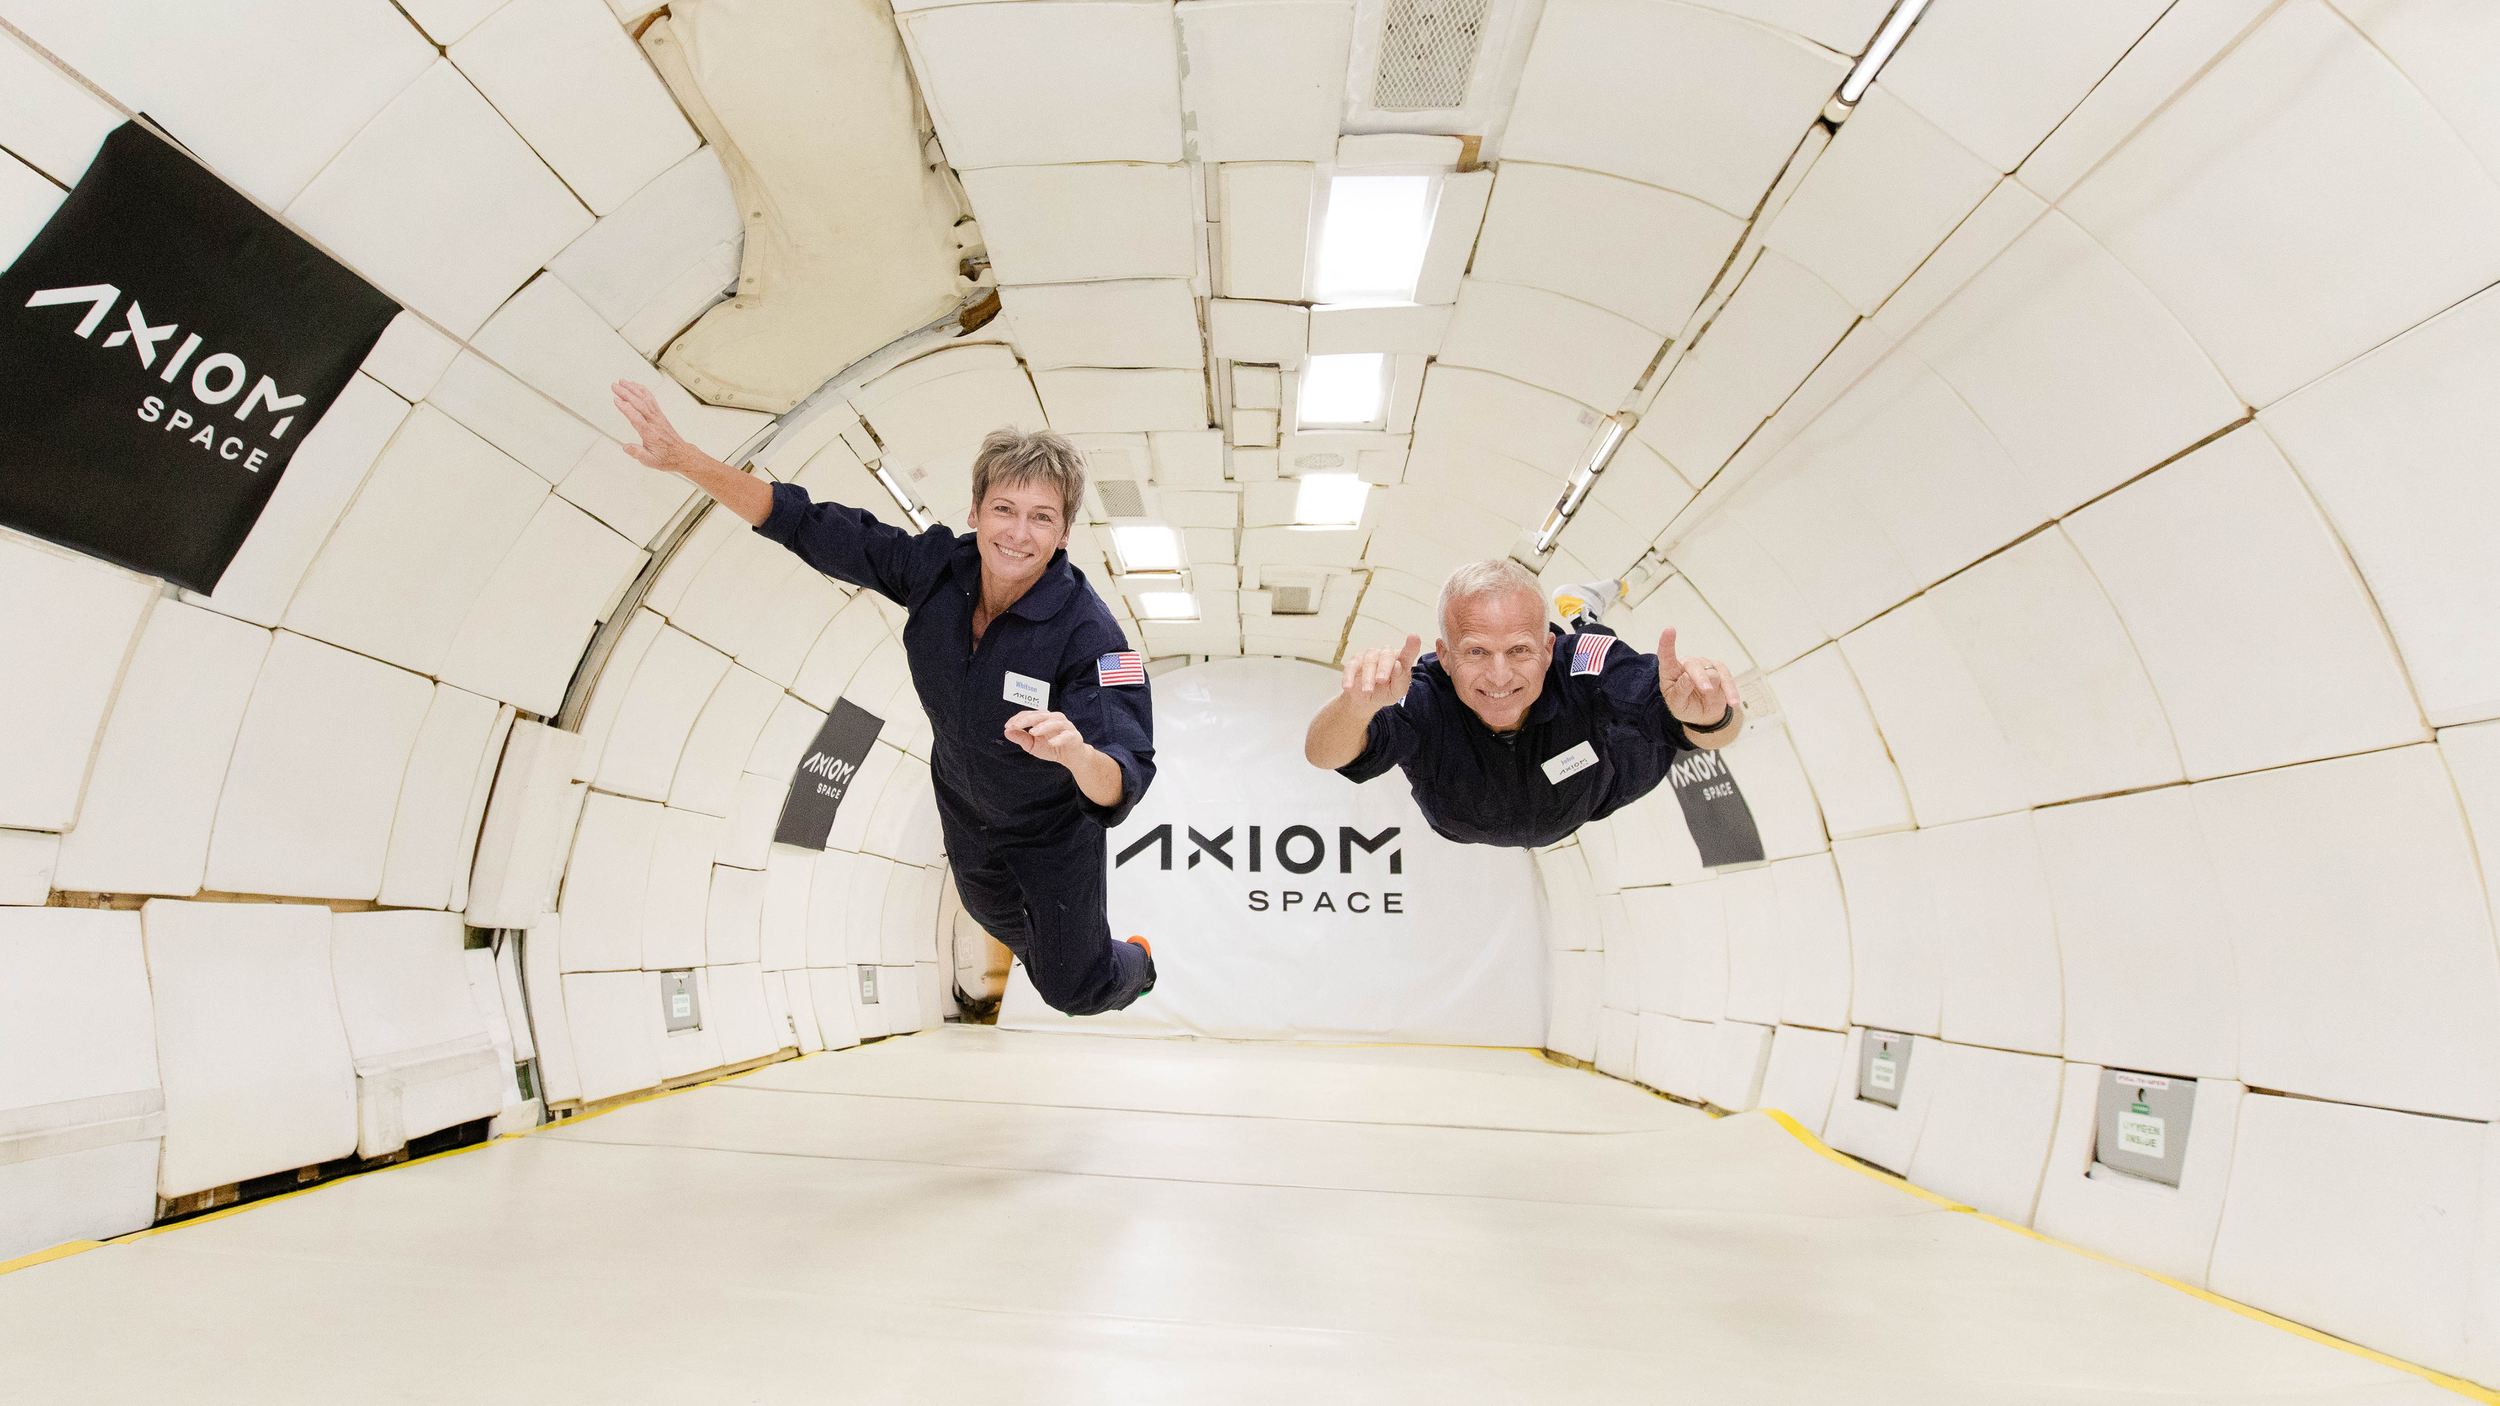 A view of the interior of a hovercraft with two astronauts.  The words 'Axiom Space' are on the wall and back